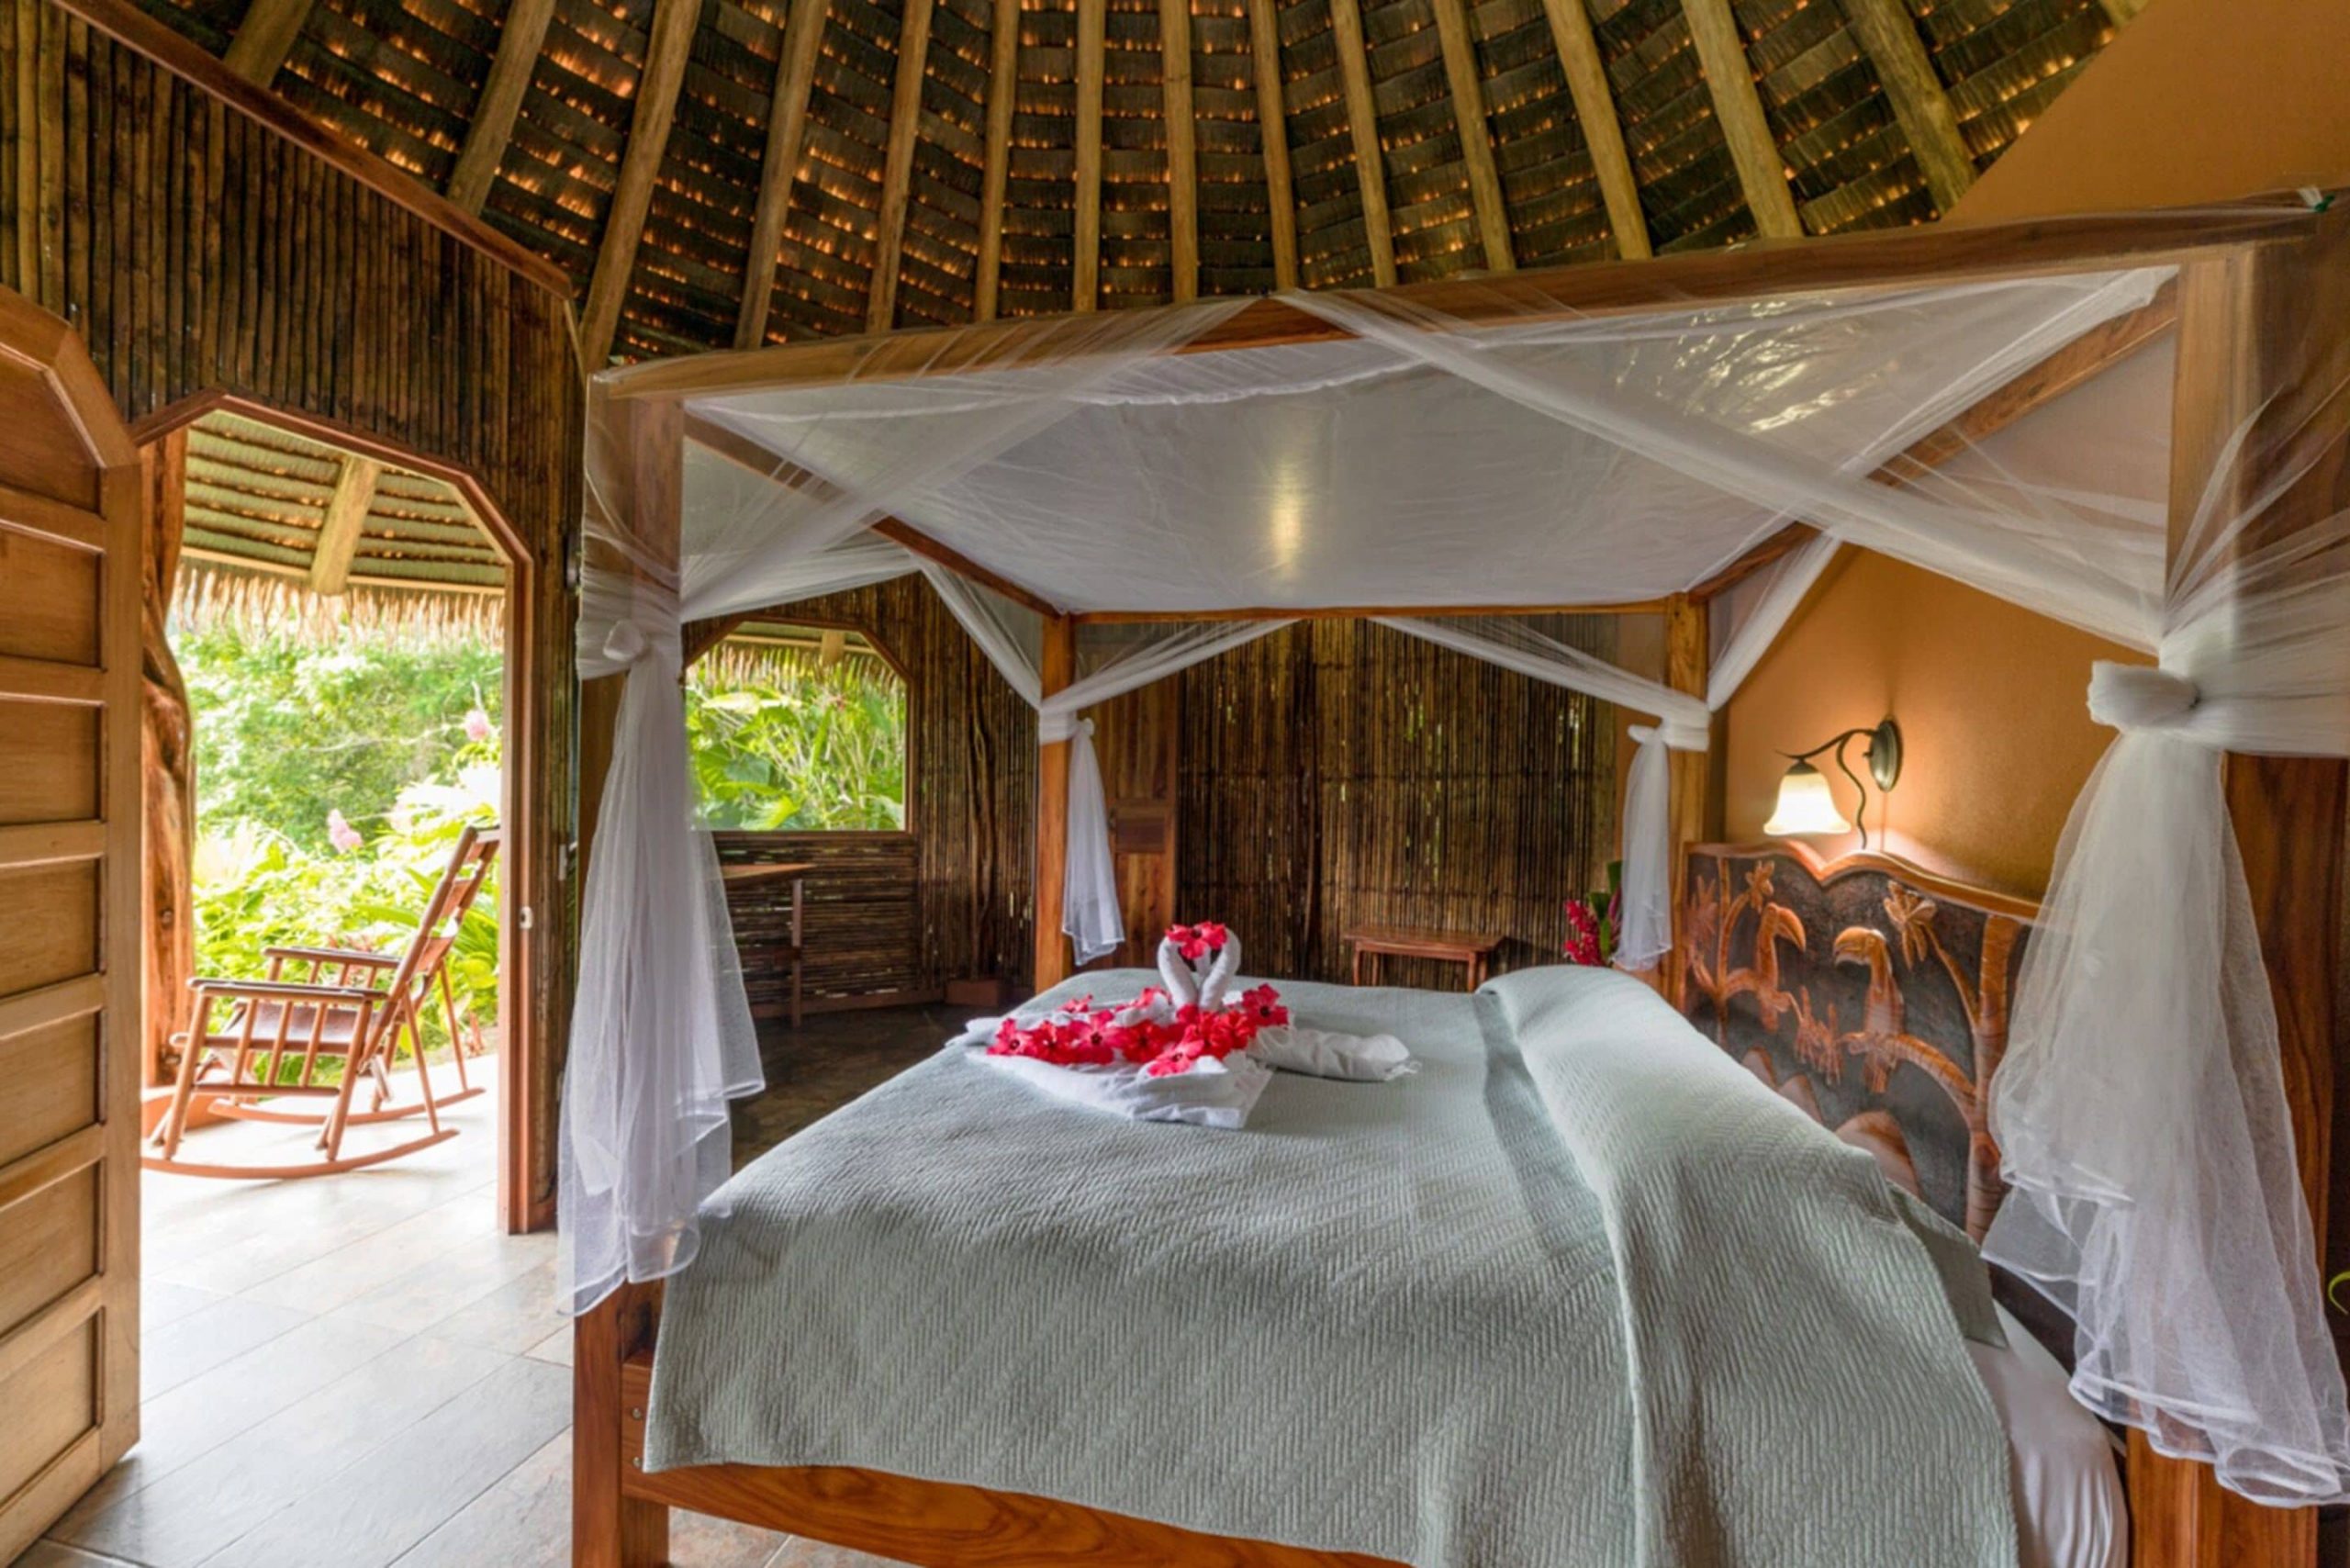 One of the villas for guests to stay in at Luna Lodge in Costa Rica with a four post bed, canopy, white linens, beautiful wooden decor, and an outdoor patio with rocking chairs.